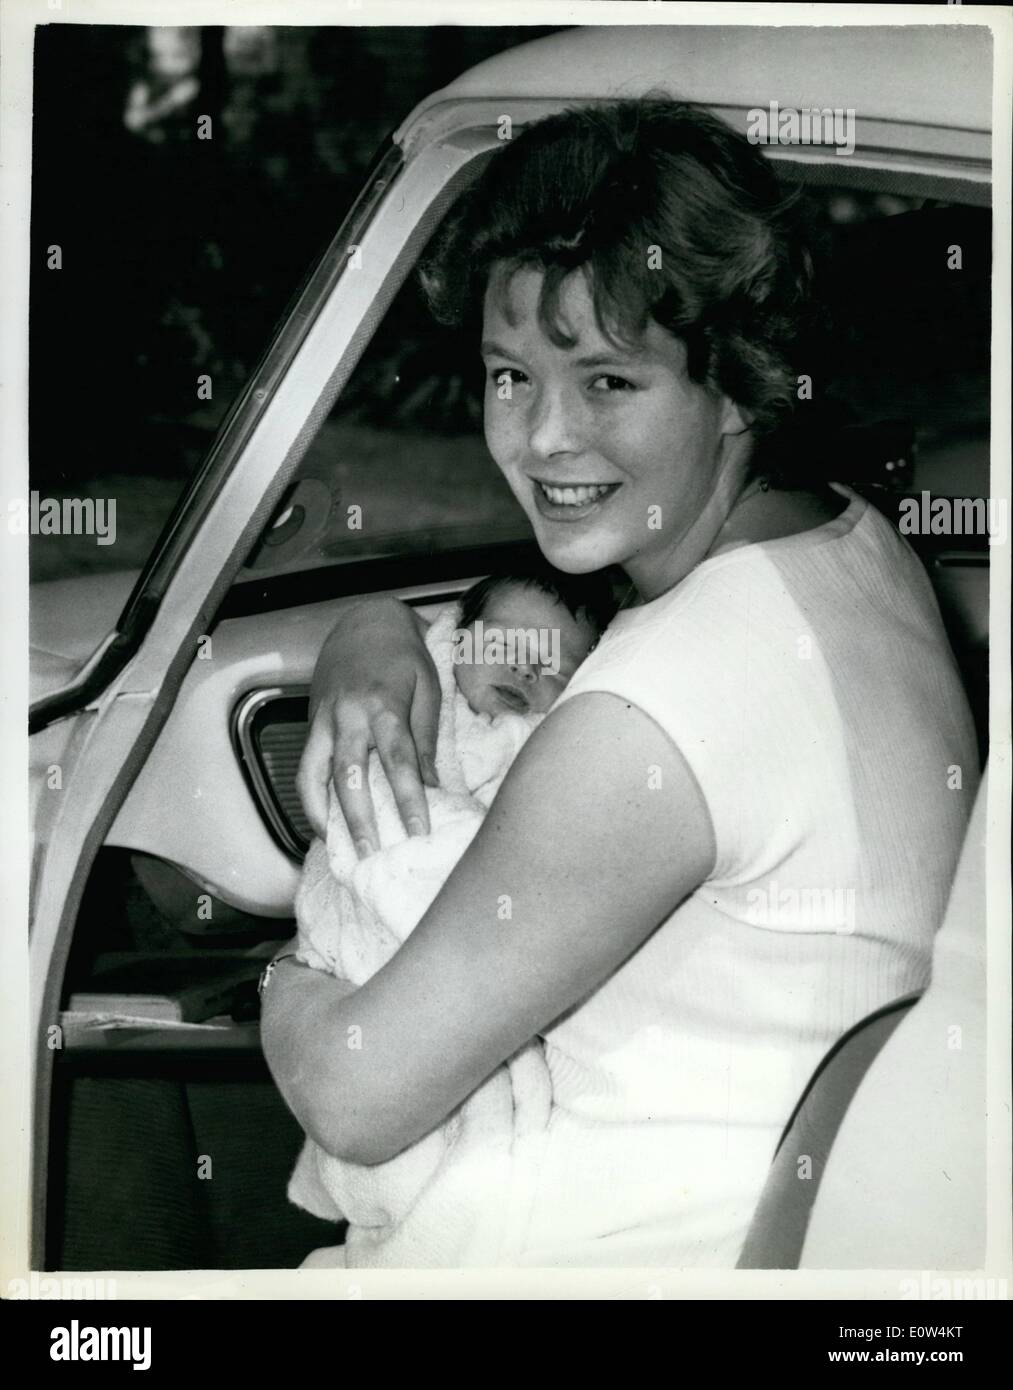 Jun. 06, 1961 - A son for Judy Grinham: Olympic swimmer, Judy Grinham, wife of sportswriter Pat Rowley, gave birth to a son in St. Mary Abbot's Hospital, Kensington, 12 days age. Today she left hospital with her baby named Keith Andrew Phillips. Photo shows carrying her baby , Judy Grinham sits sits down in the car for the drive back to her Lea gardens, Wembley, home. Stock Photo